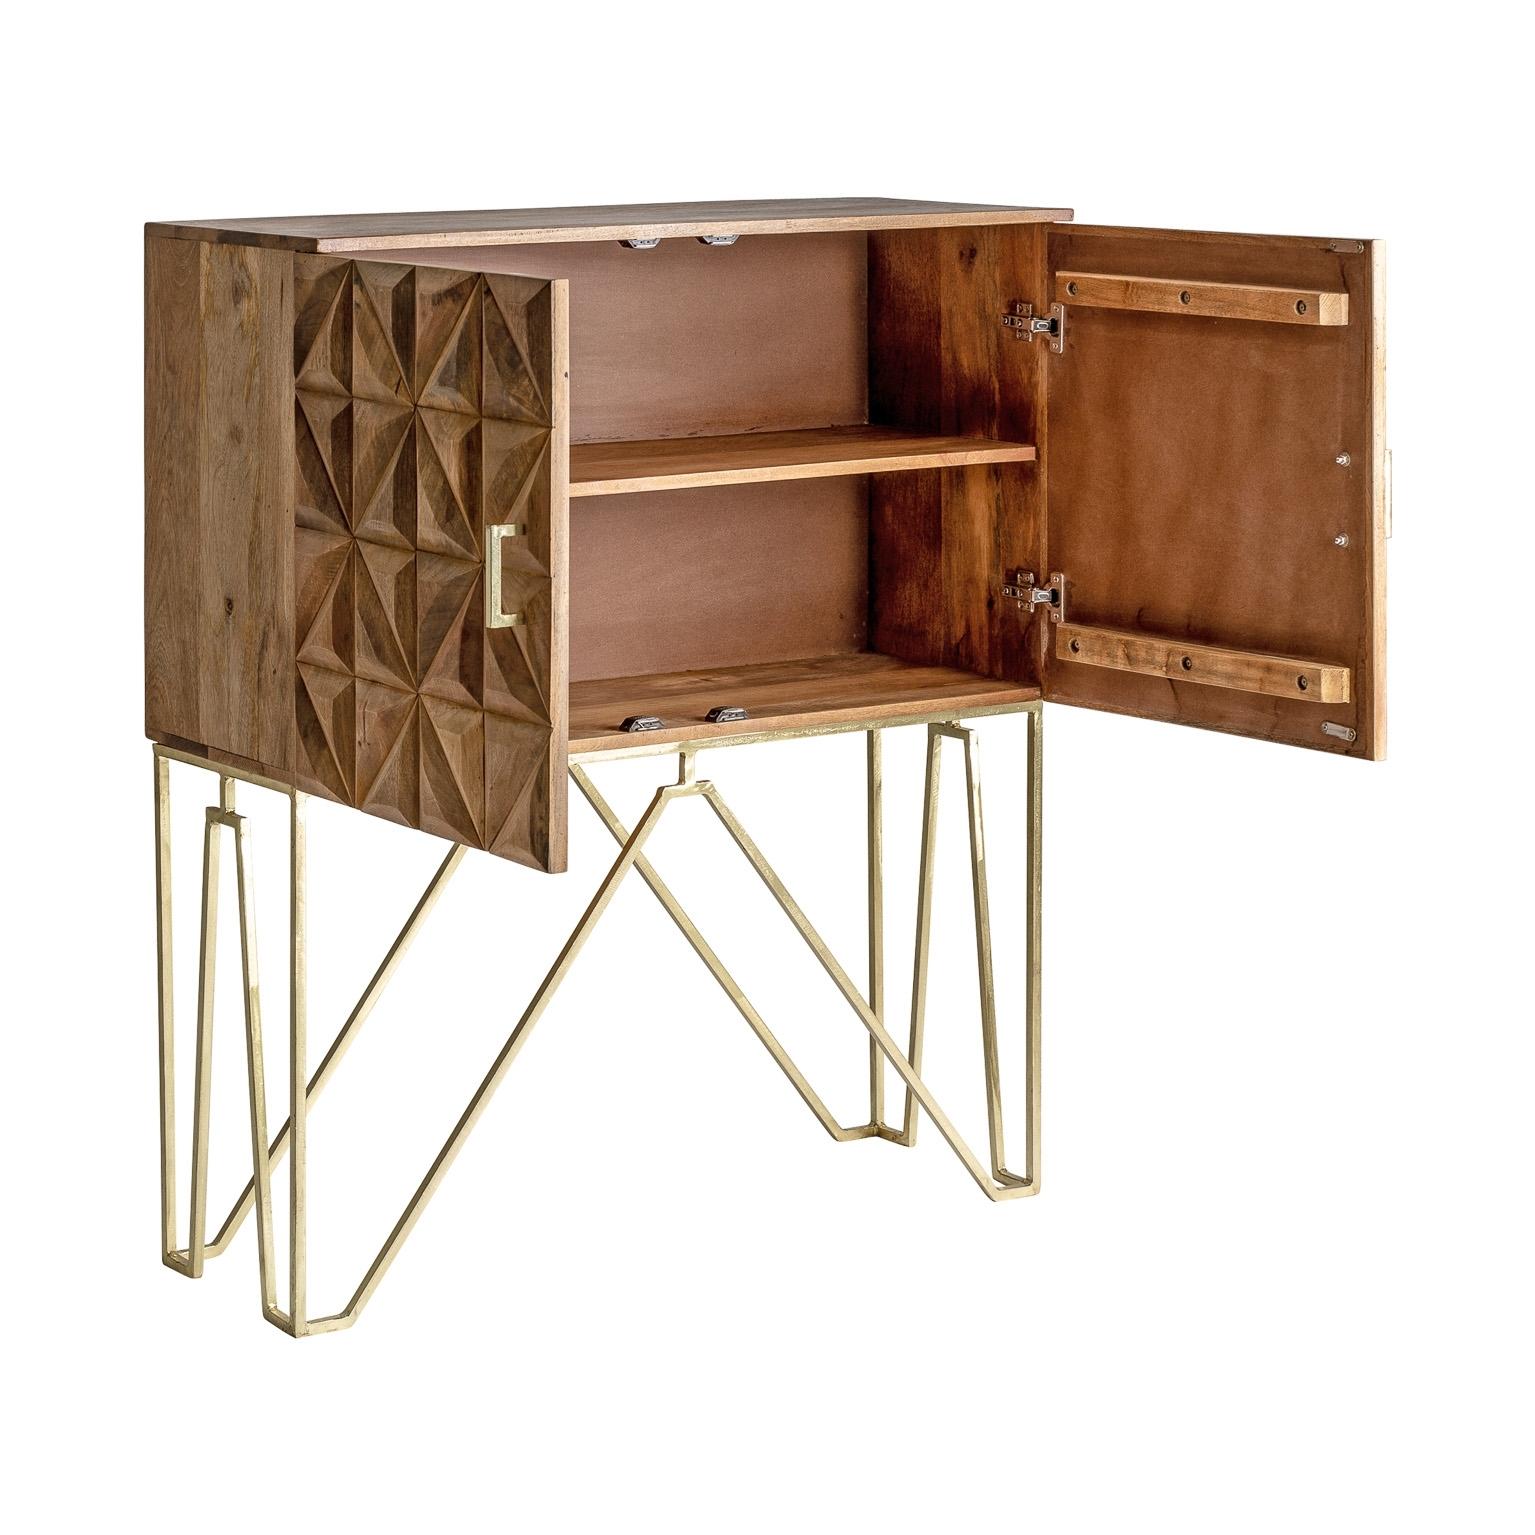 Brutalist style wooden cabinet : An eyecatcher with geometrical and harmonious lines, it is composed of 2 graphic door panels adorned with gilded metal feet space. Gold and wood patina, a diamond!